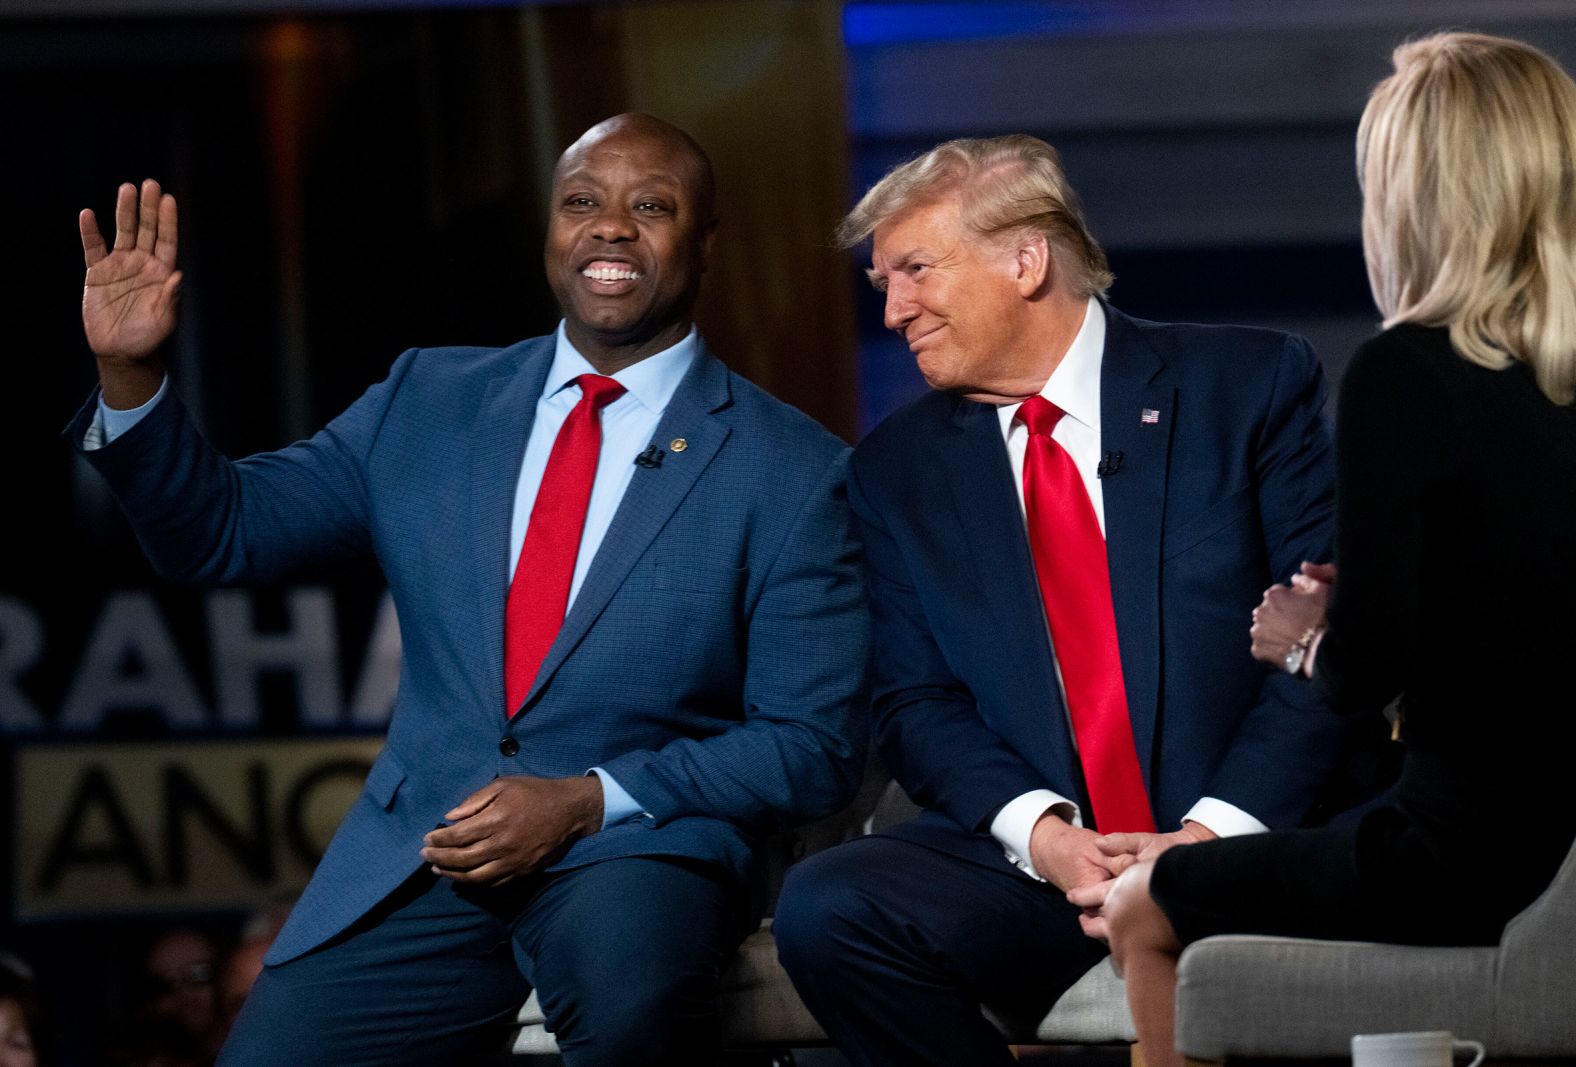 Scott joins Trump at a Fox News town hall in Spartanburg, South Carolina, in February 2024. After Scott dropped out of the presidential race in November 2023, <a href="index.php?page=&url=https%3A%2F%2Fwww.cnn.com%2F2024%2F02%2F23%2Fpolitics%2Ftim-scott-trump-haley-south-carolina%2Findex.html" target="_blank">he would go on to endorse Trump</a>.